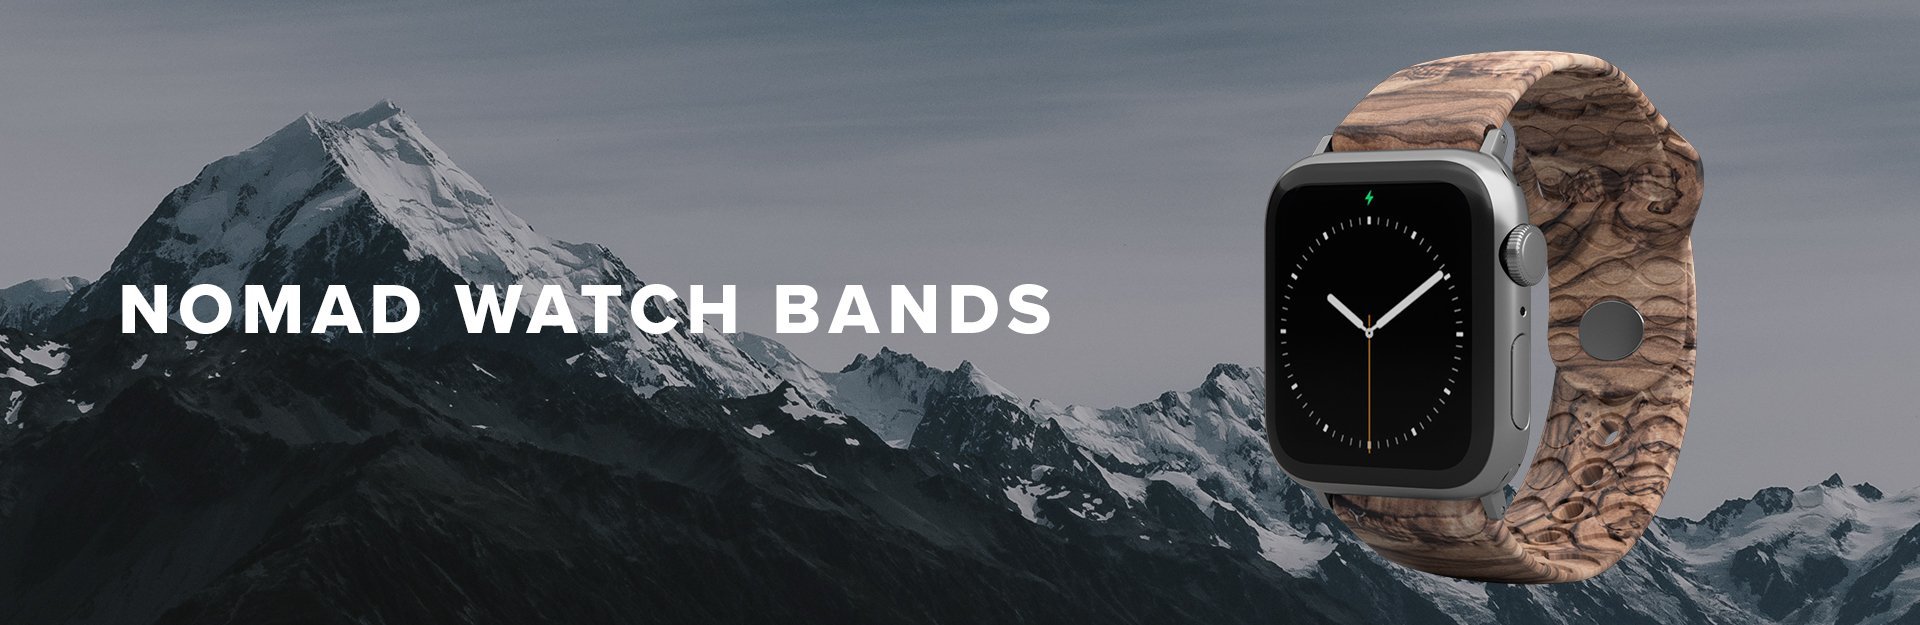 Nomad Watch Bands, burled walnut watch band overlaid on snowy mountains